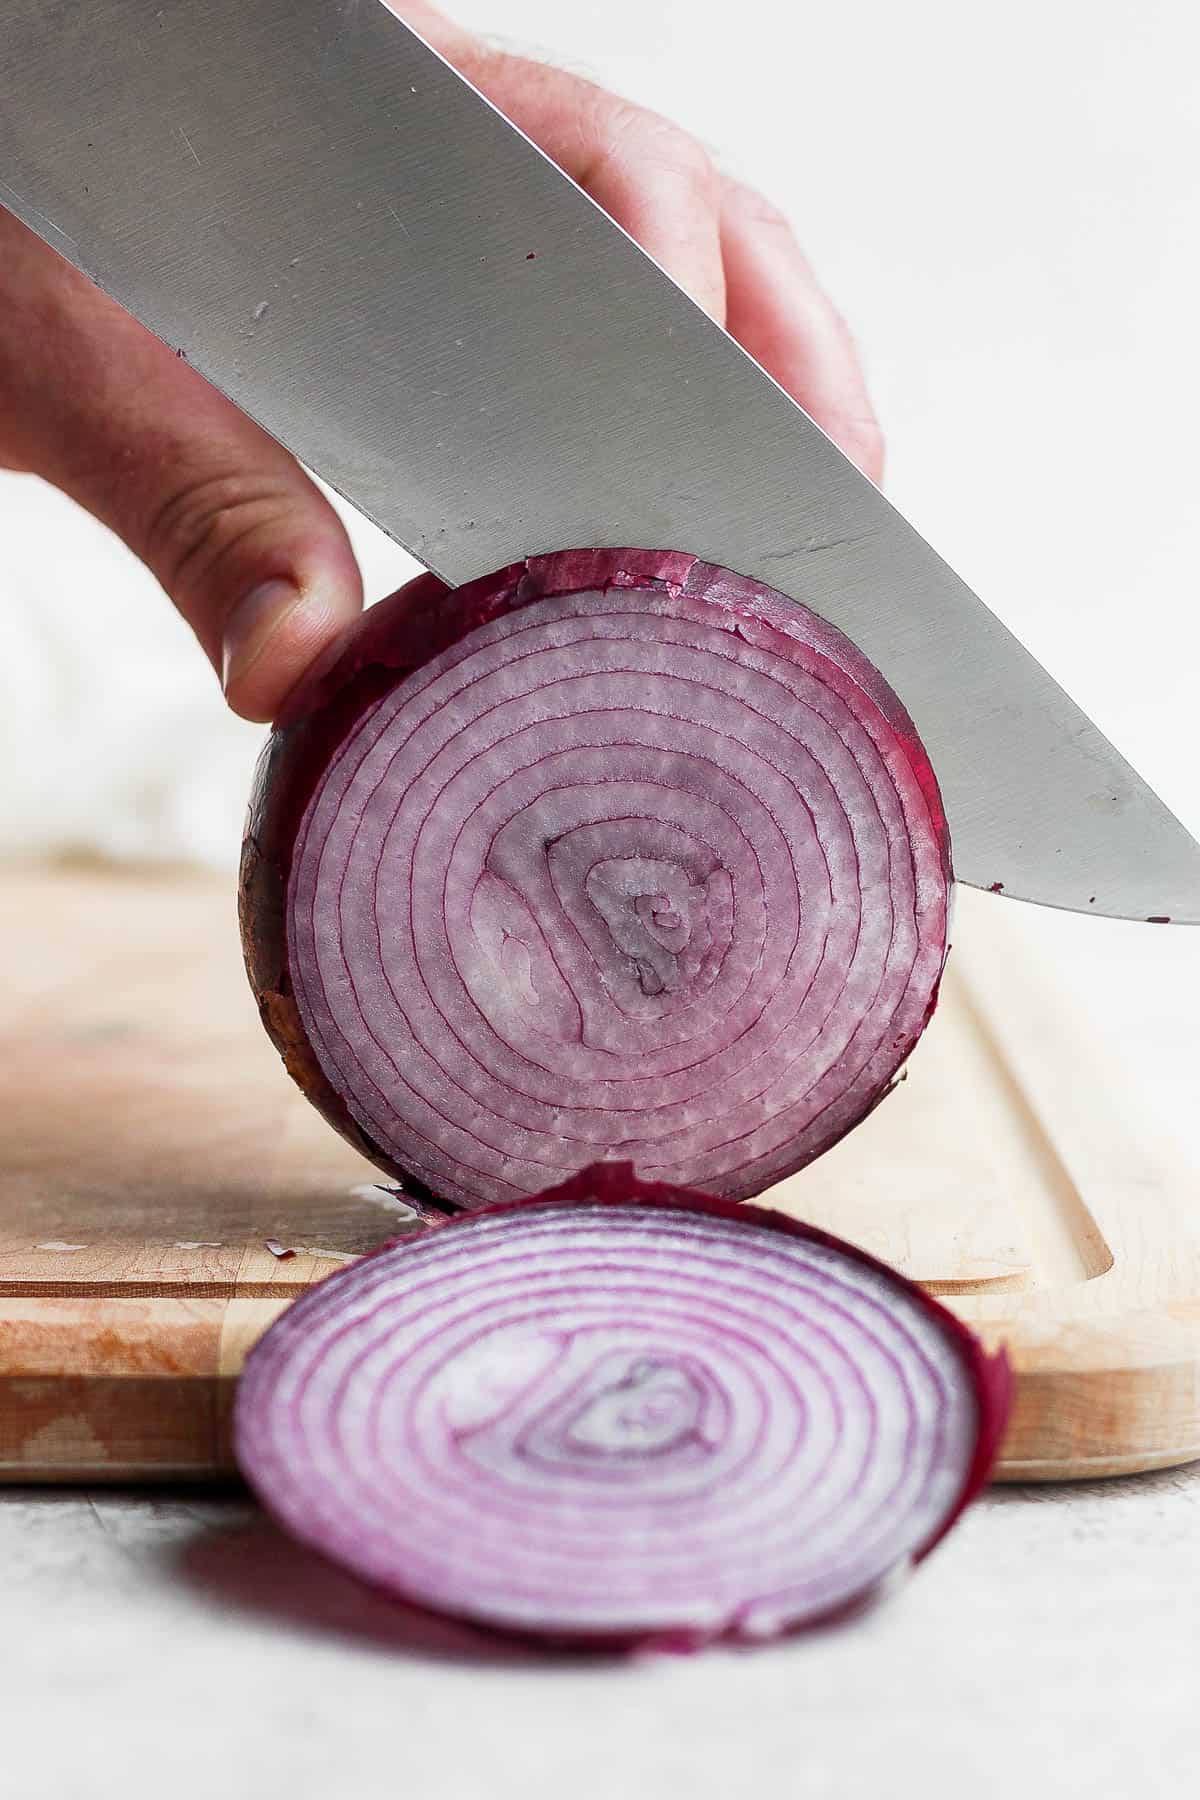 A red onion being sliced on a cutting board.